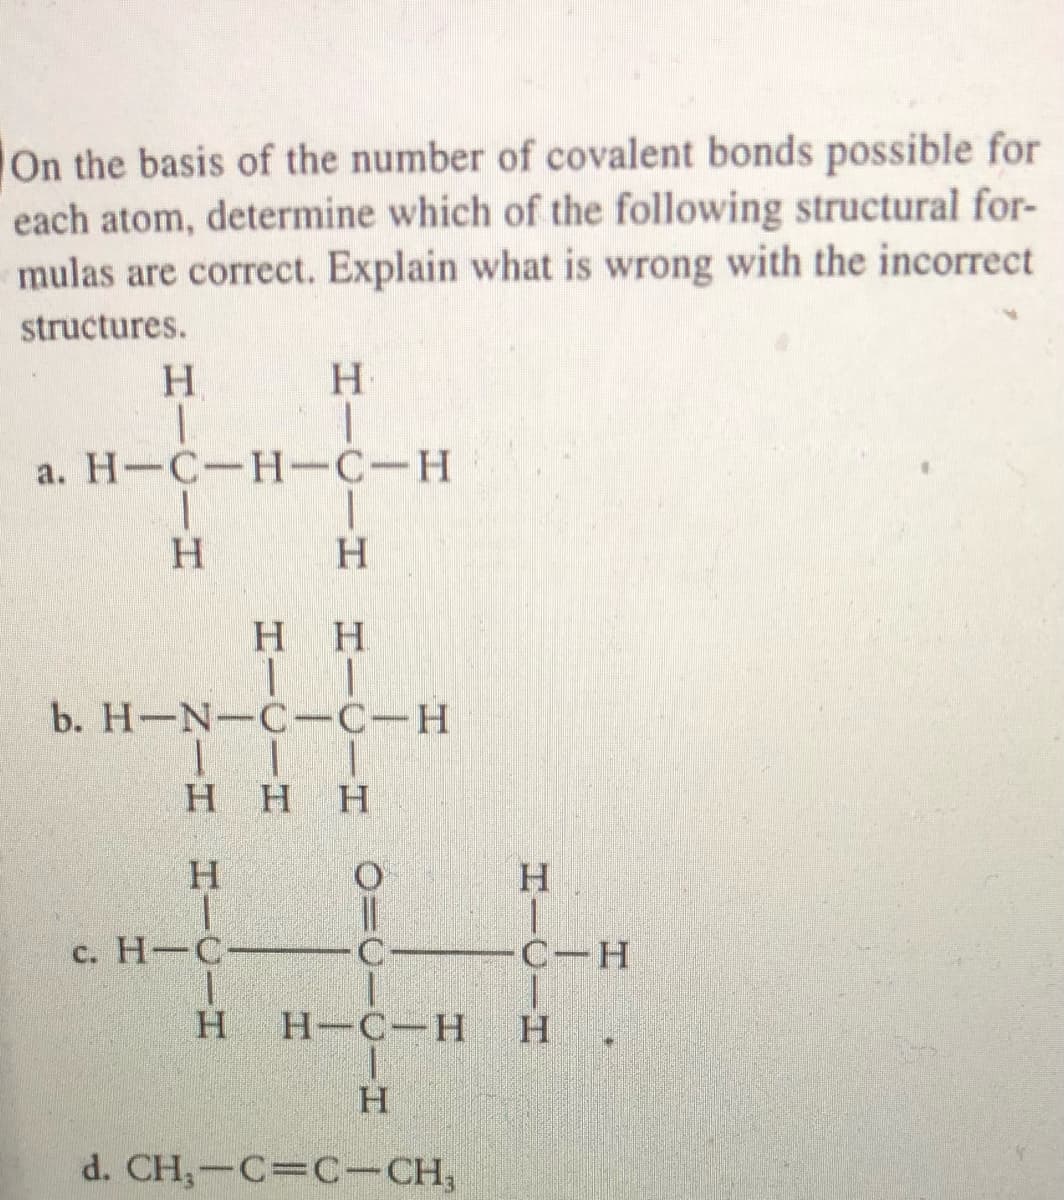 On the basis of the number of covalent bonds possible for
each atom, determine which of the following structural for-
mulas are correct. Explain what is wrong with the incorrect
structures.
H.
a. H-C-H-C-H
H.
H.
H H
b. H-N-C-C-H
H.
Нн
c. H-C
C-H
Н-С—Н
H.
d. CH,-C=C-CH,
HICIH
HICIH
